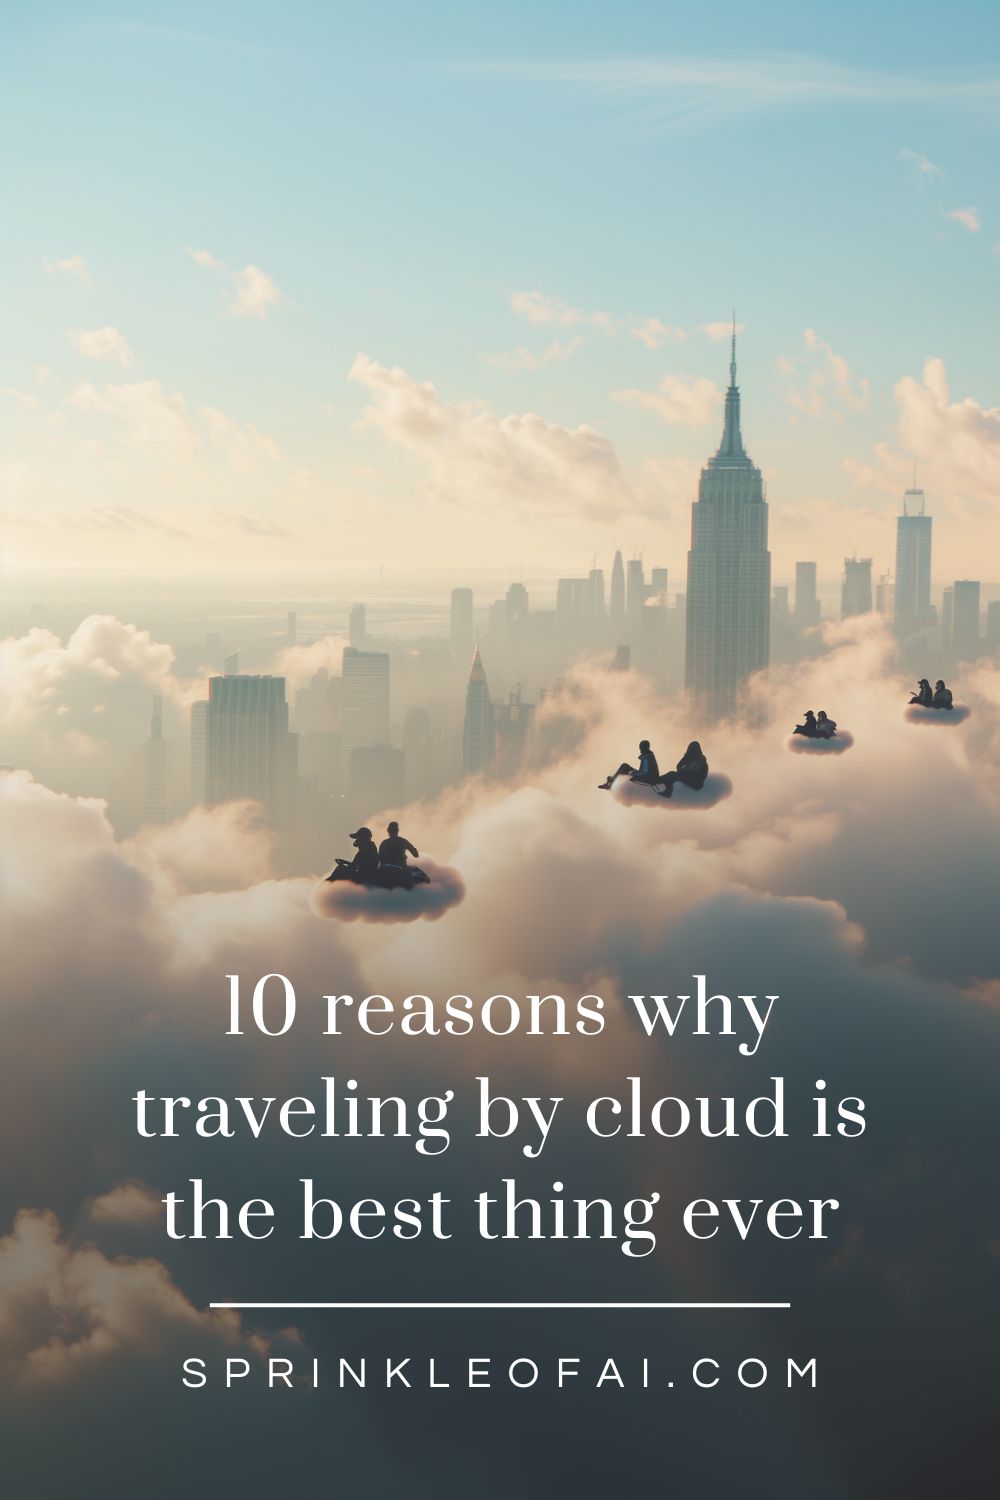 10 Reasons Why Traveling By Cloud Is The Best Thing Ever - Sprinkle of AI - AI ART BLOG